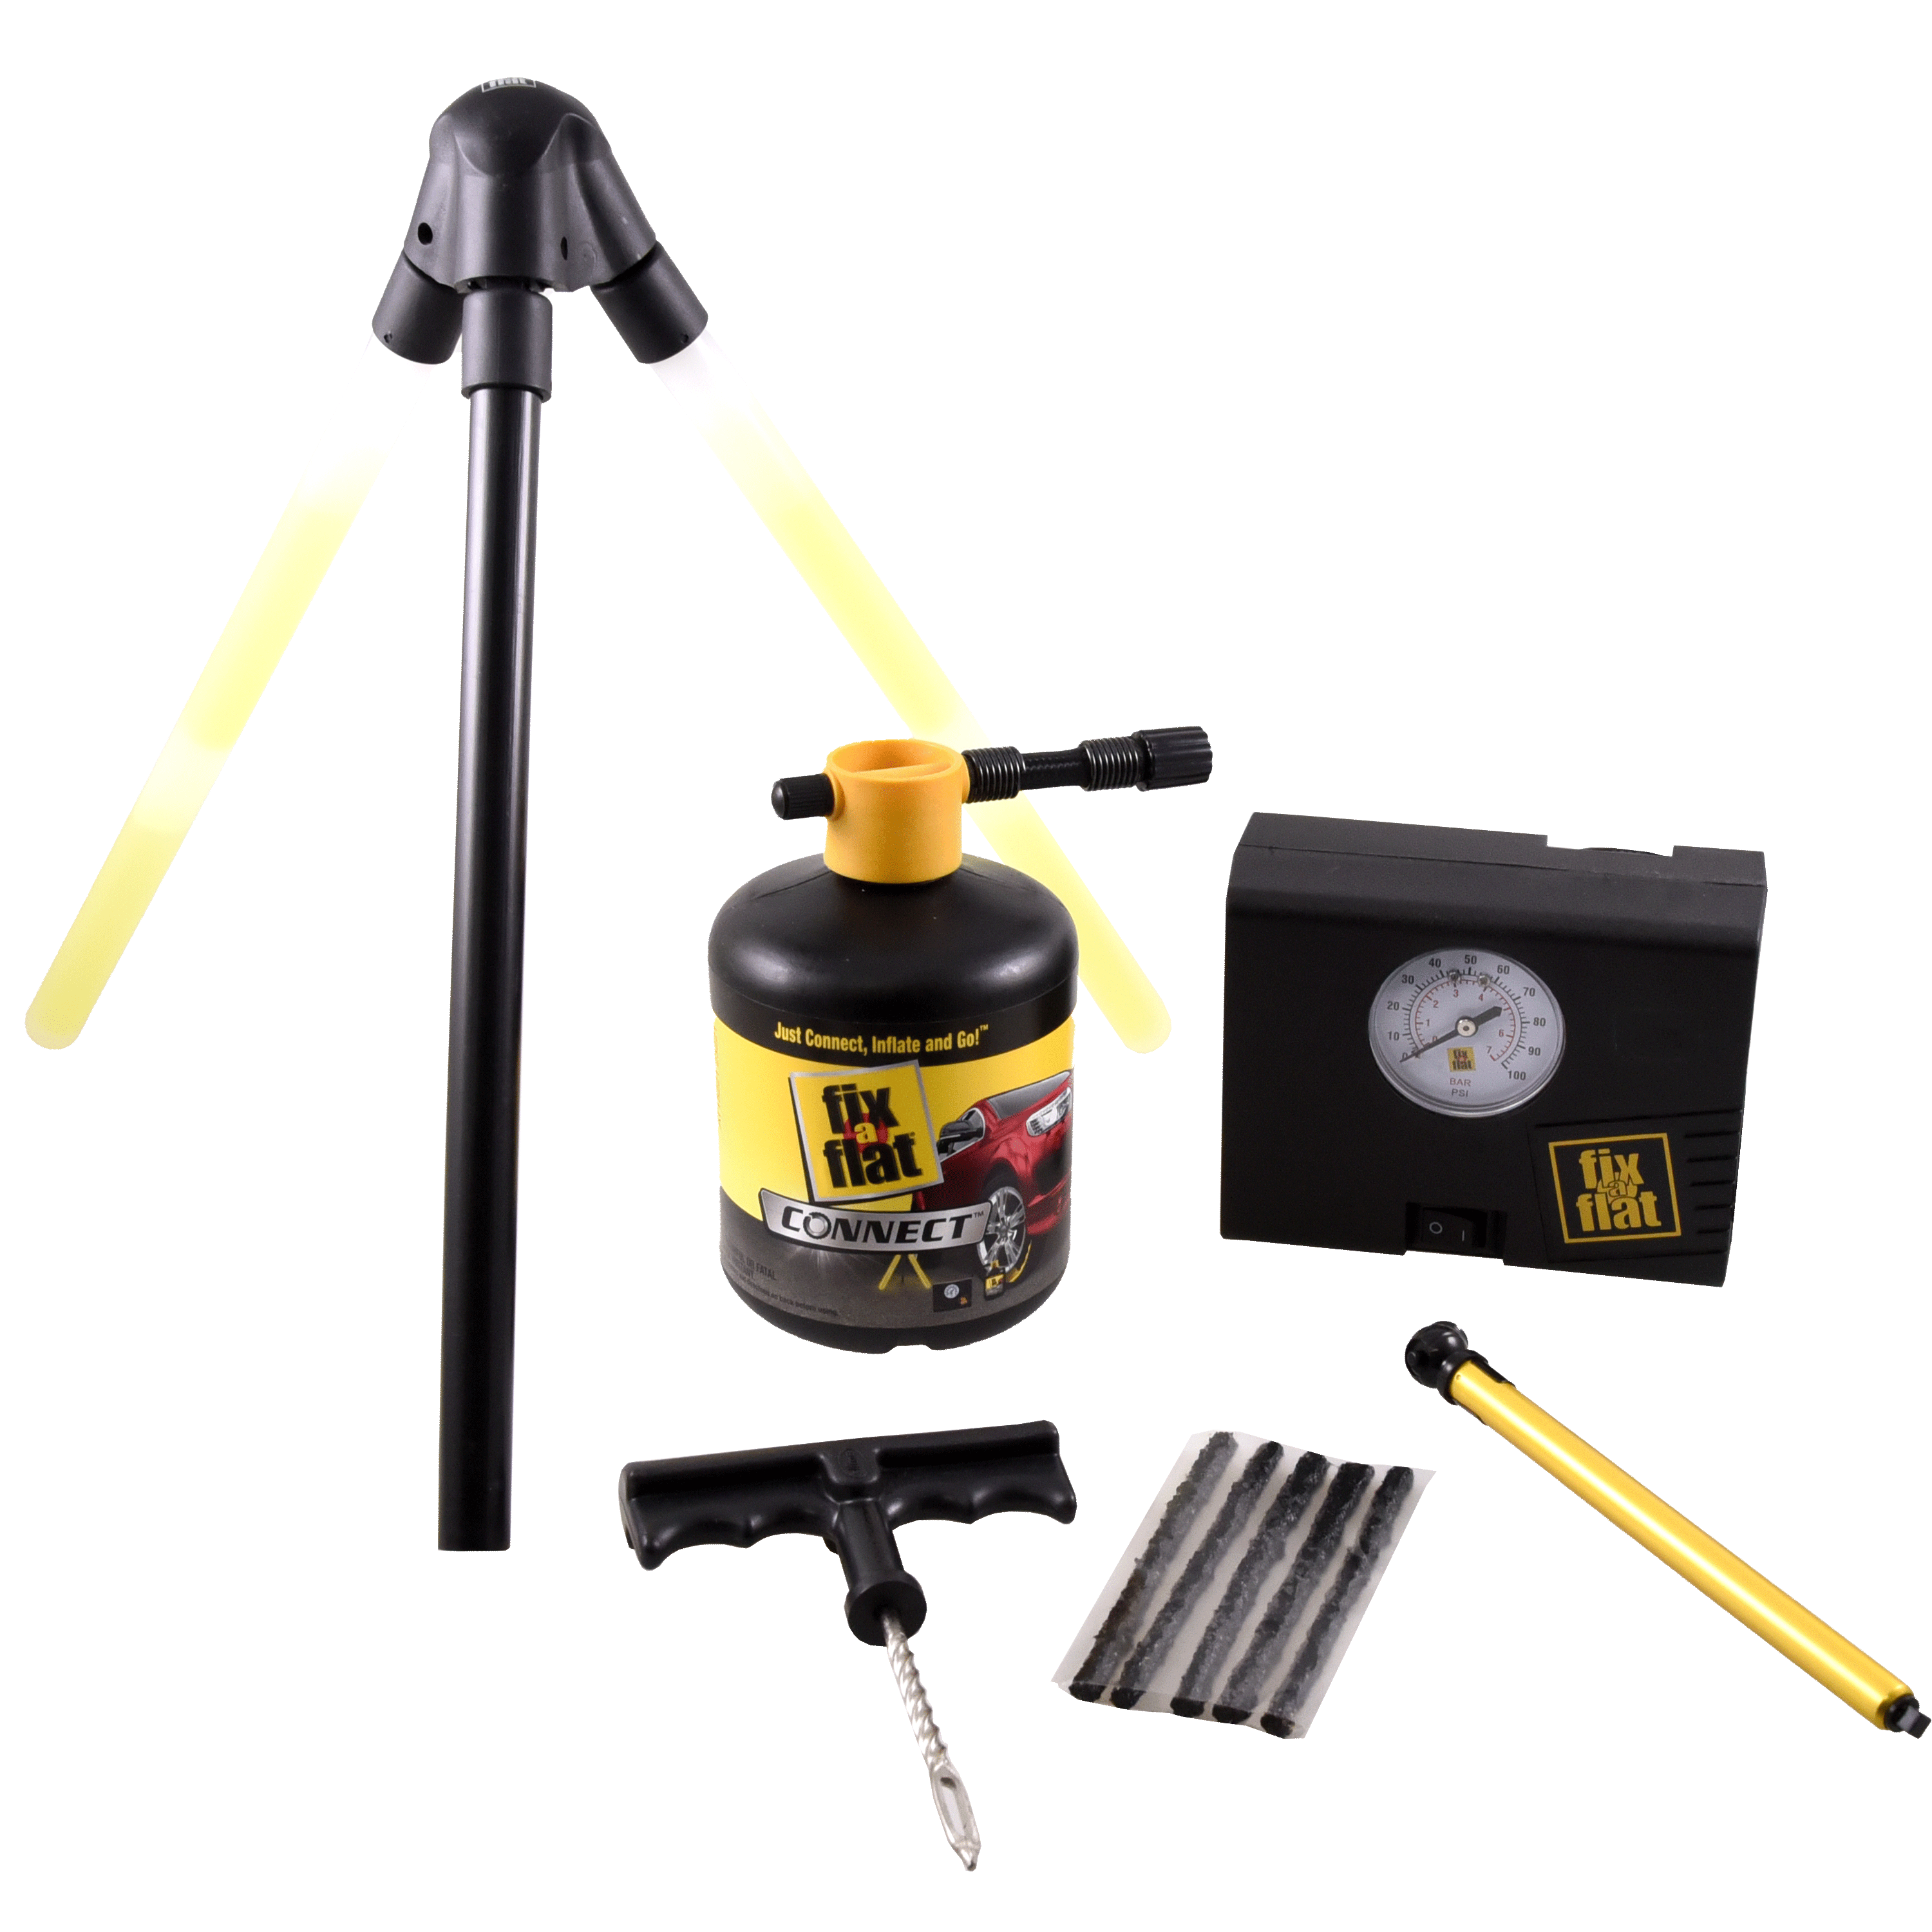 Fix-a-Flat Spare in Box Tire Repair Kit, S50153 - image 2 of 6